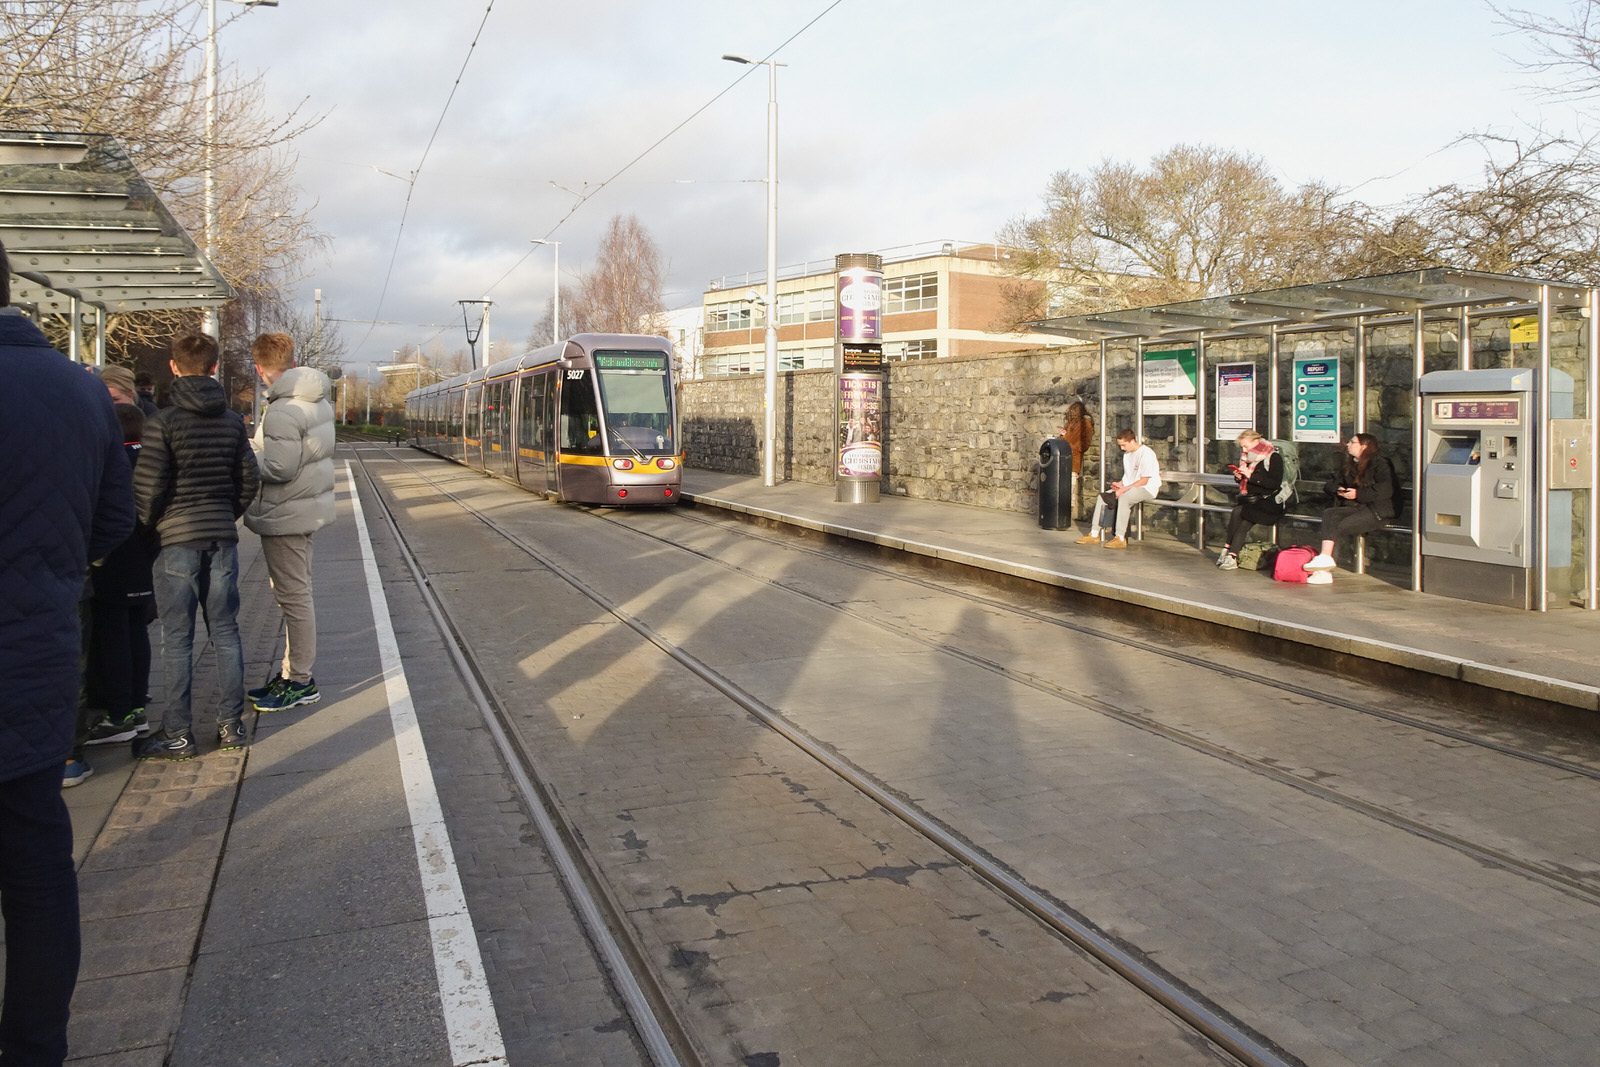 THE MILLTOWN LUAS TRAM STOP A FEW DAYS BEFORE CHRISTMAS DAY [AND NEARBY]-226264-1